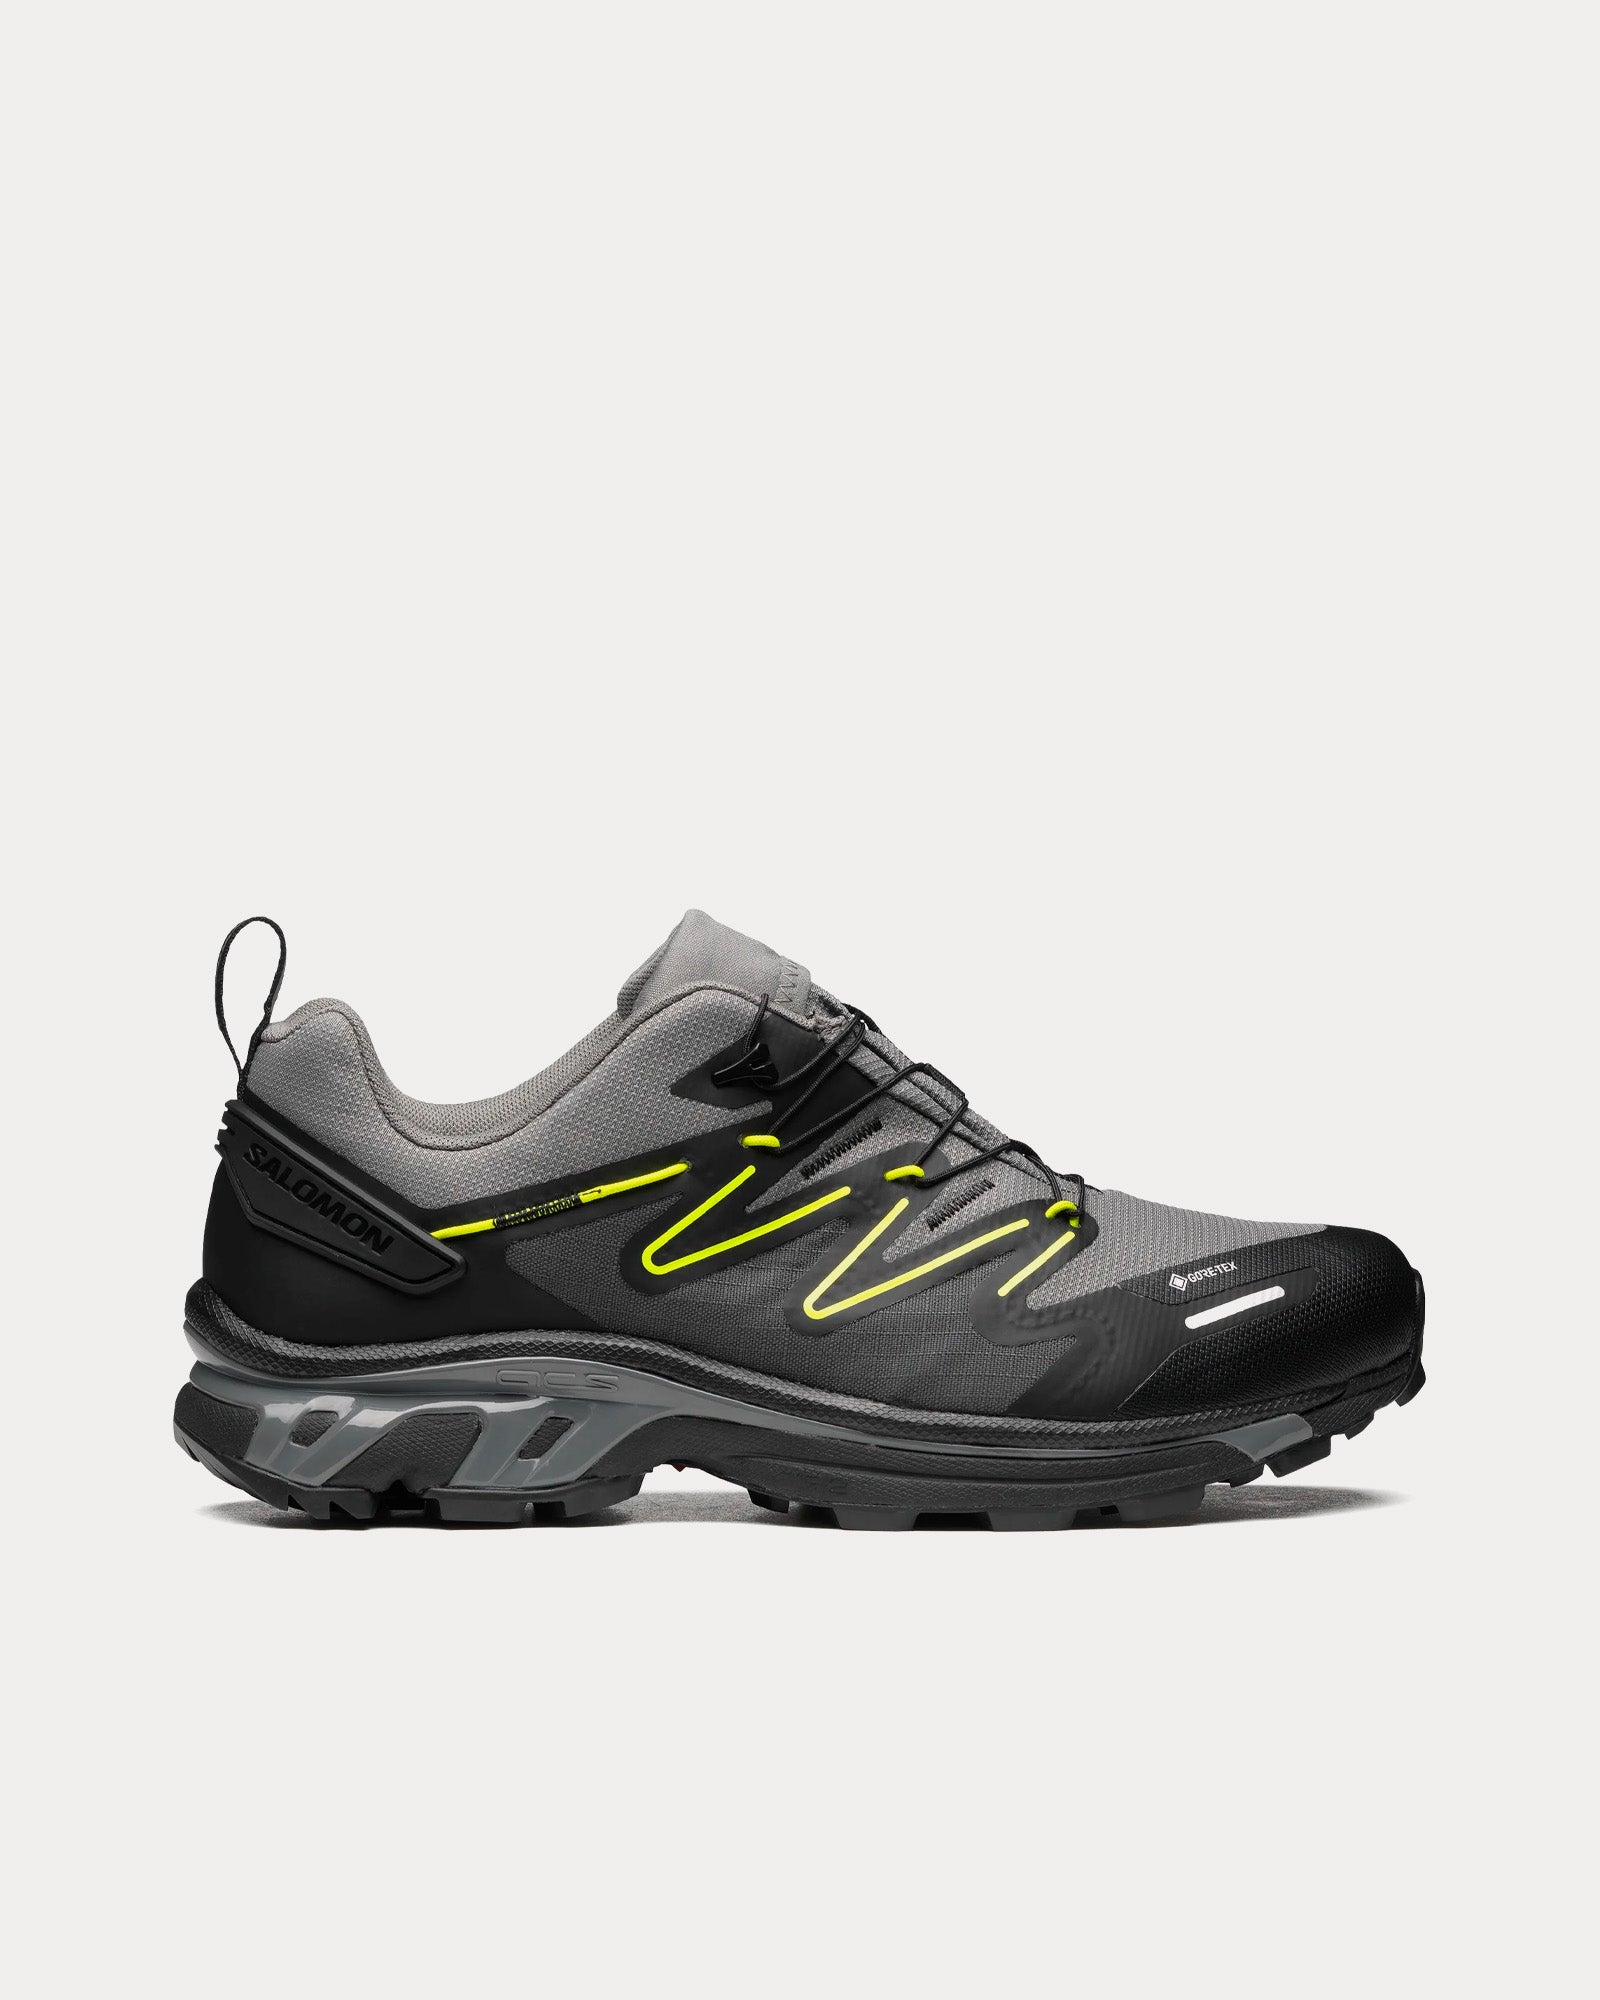 XT-Rush 2 Gore-Tex Pewter / Black / Safety Yellow Low Top Sneakers